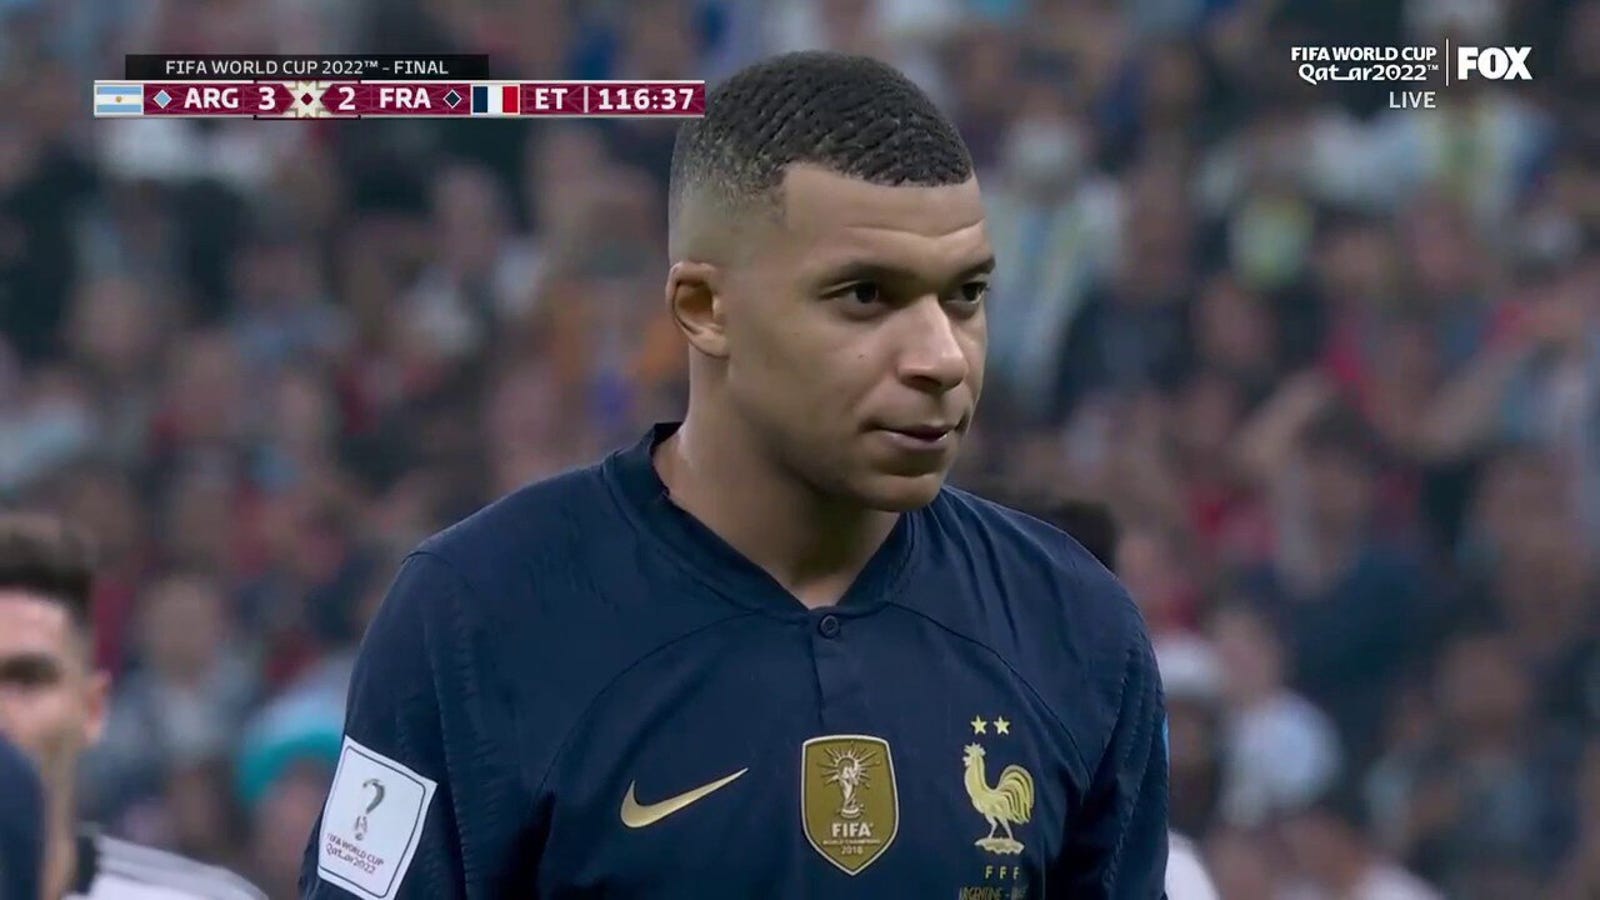 Kylian Mbappe equalizes it in the 116th minute